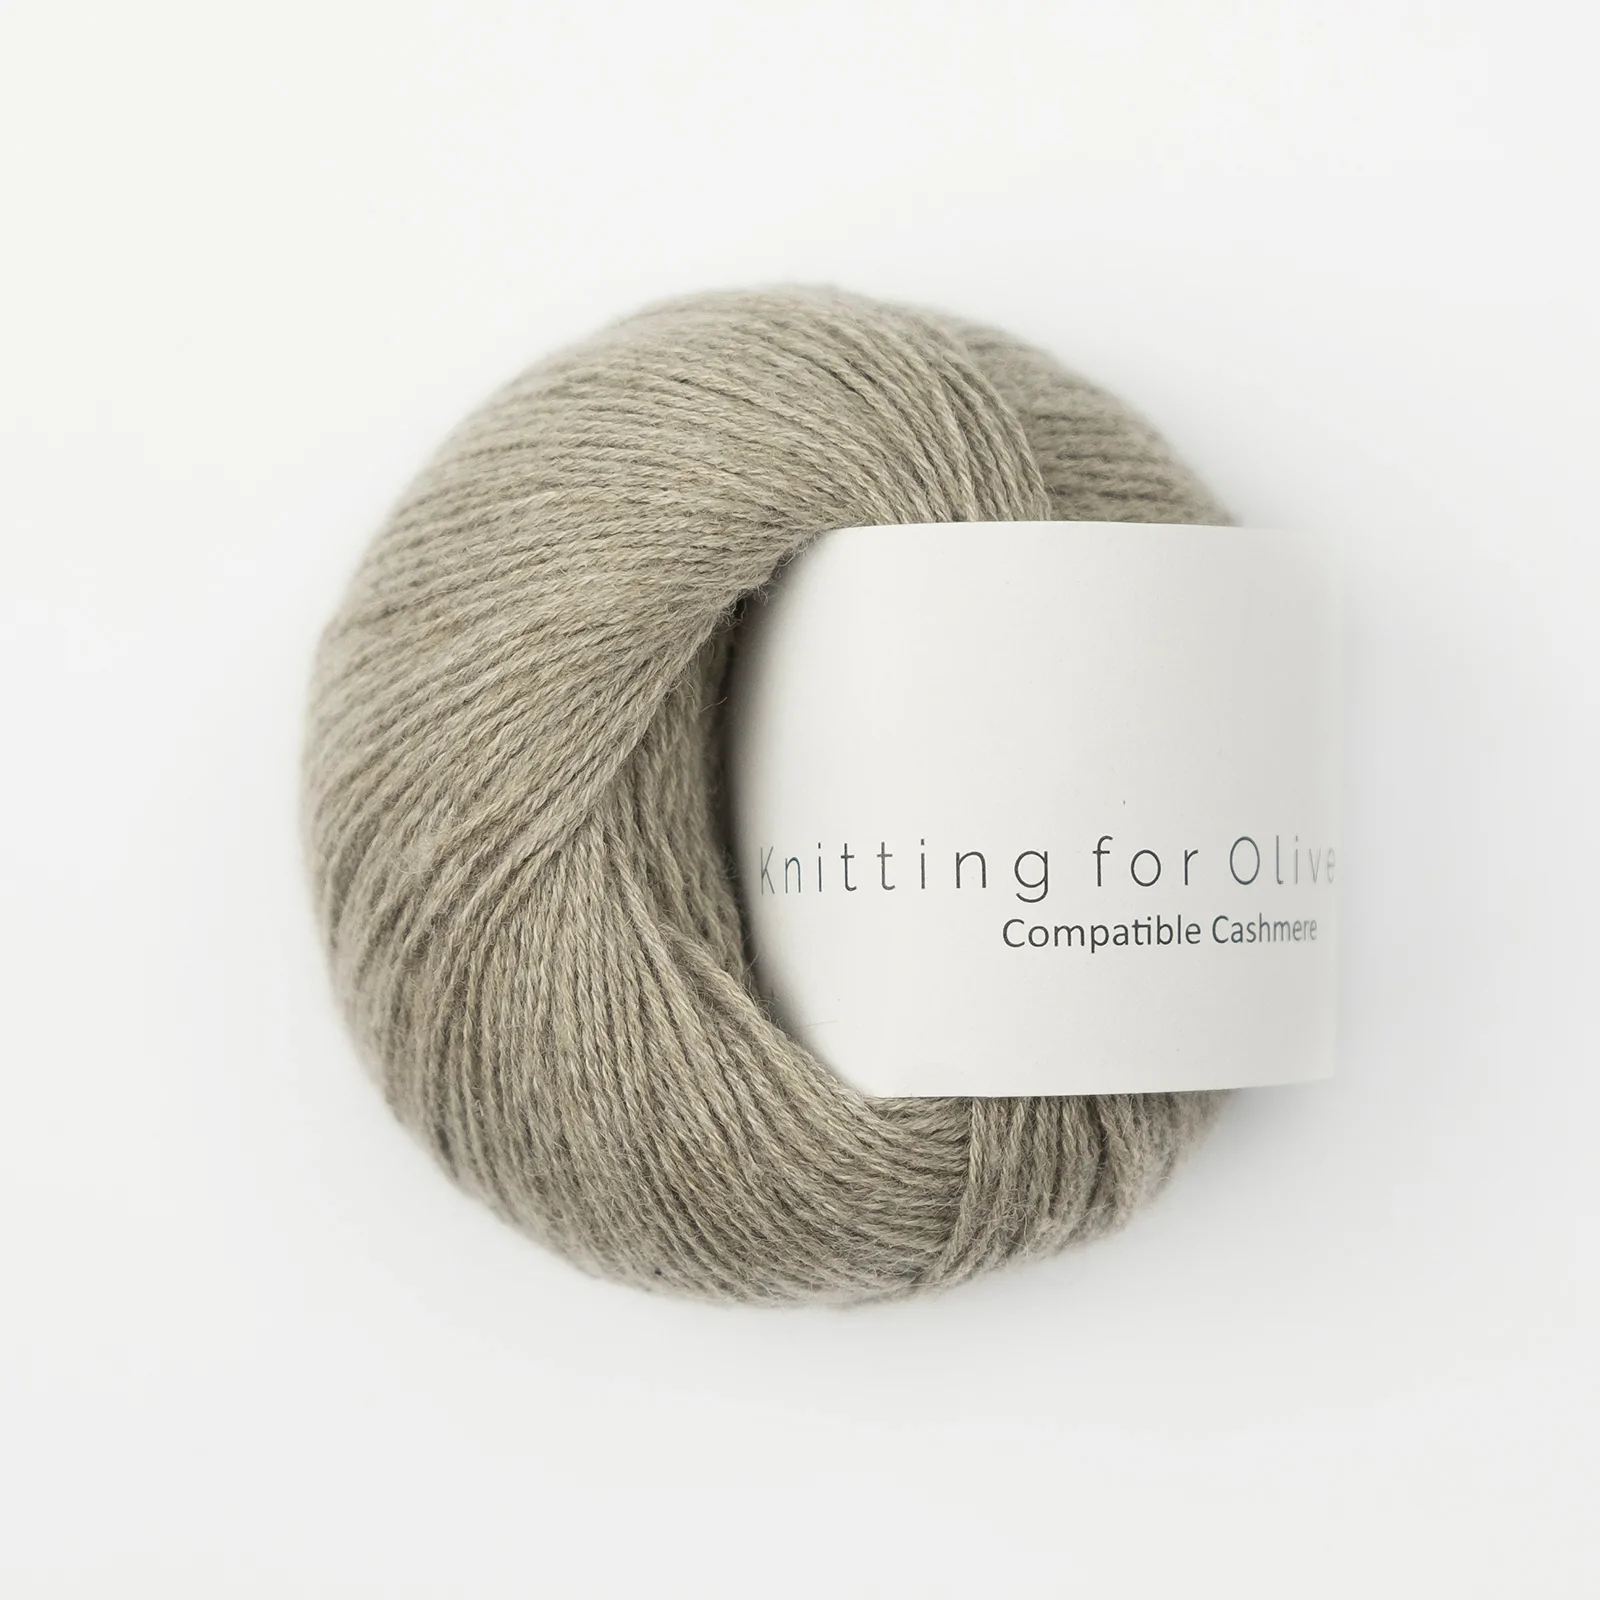 compatible cashmere knitting for olive | compatible cashmere: nordic beach